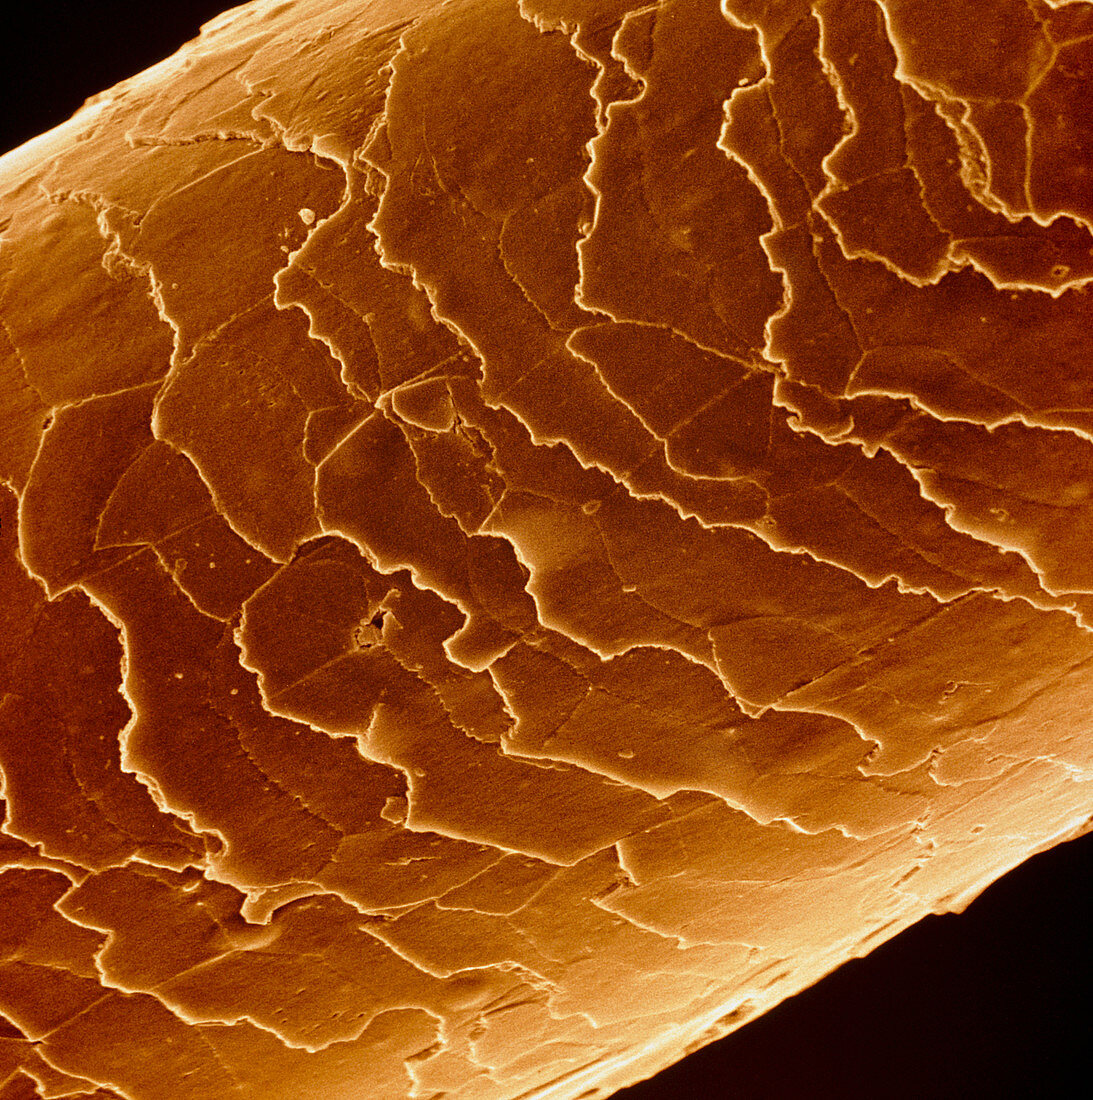 Coloured SEM of the surface of a human hair